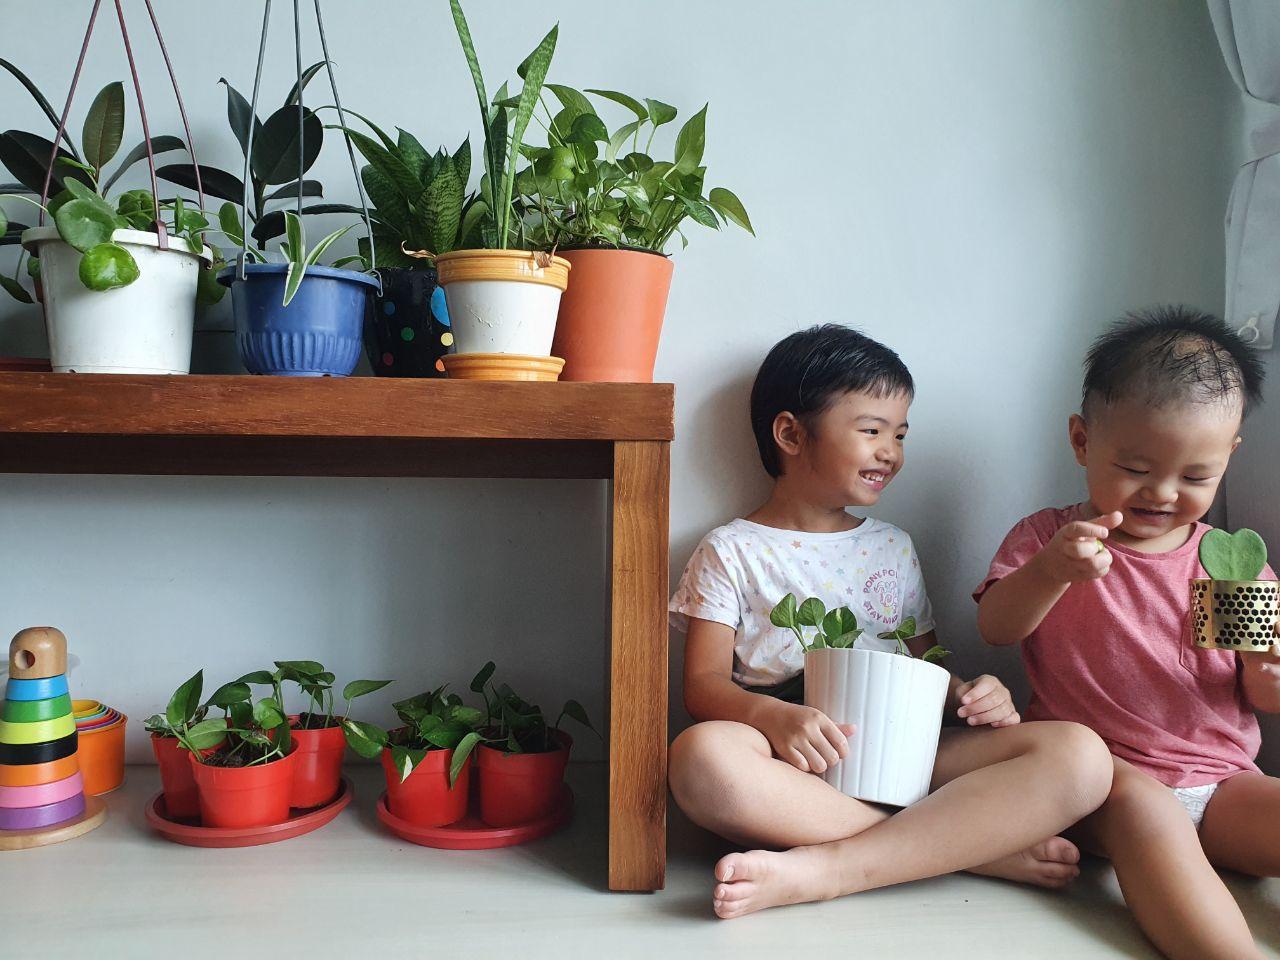 Mya and her little brother, Nathan, with their collection of plants.